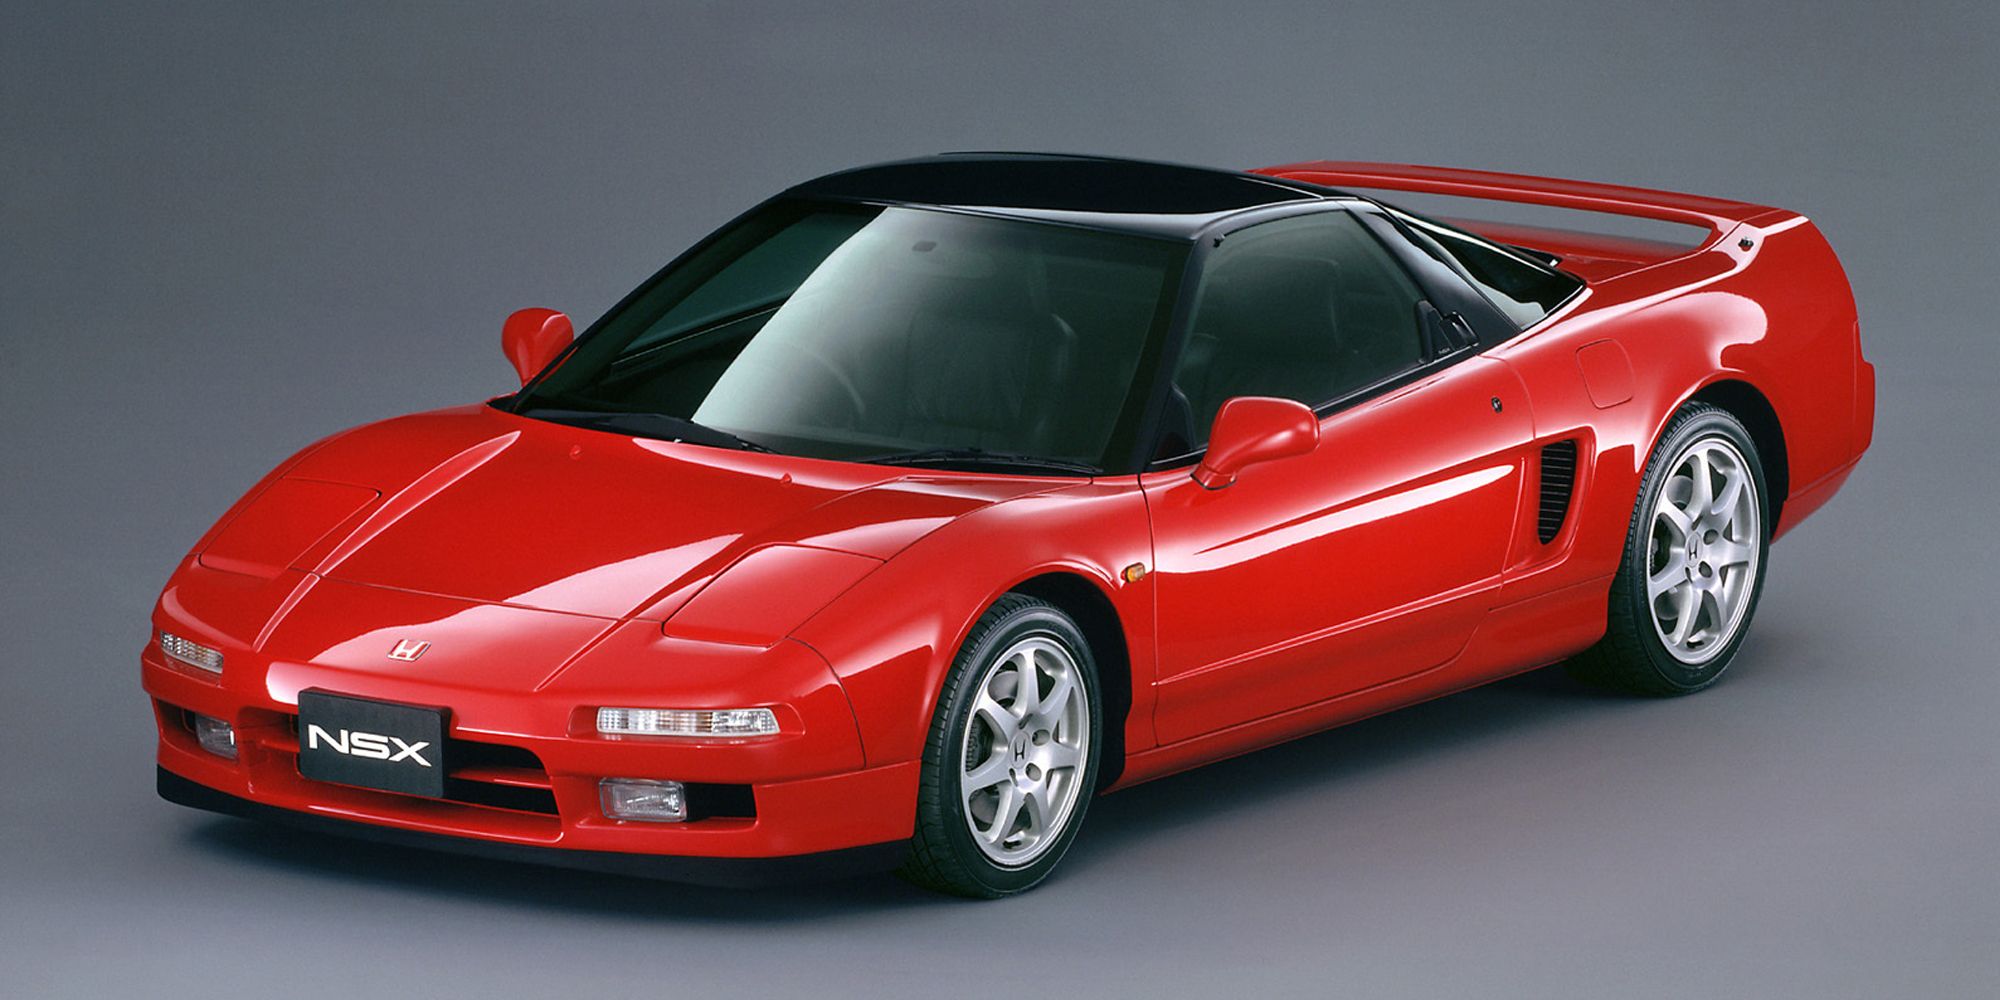 The front of the NA1 NSX